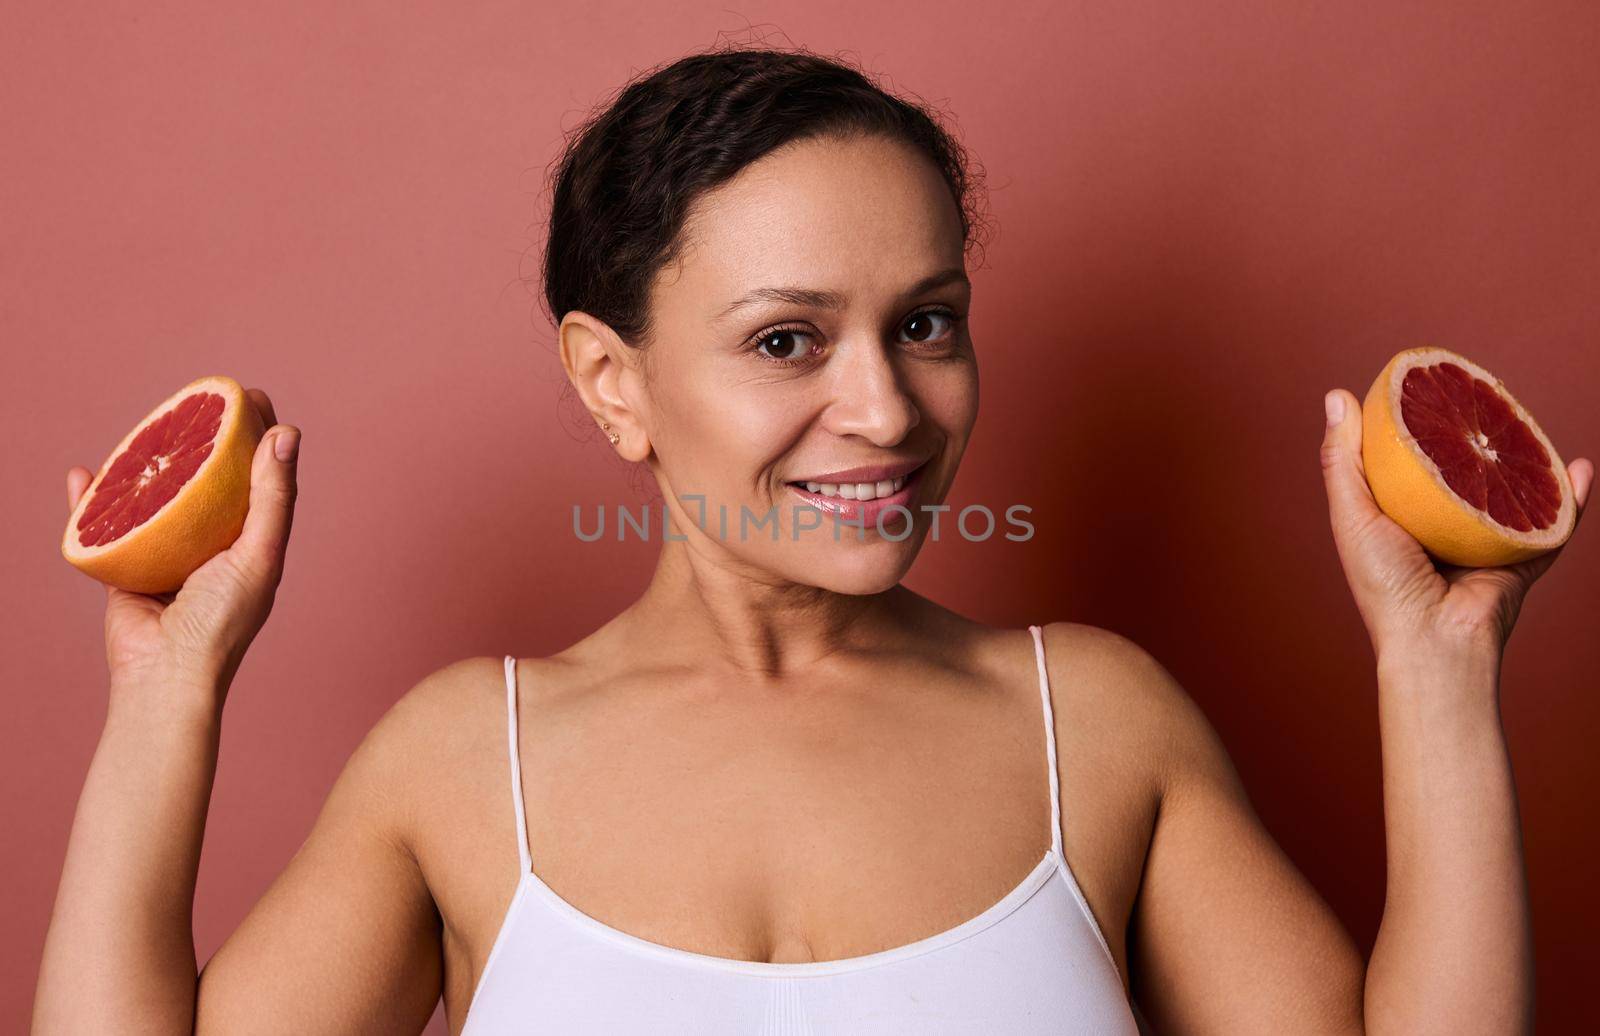 Charming middle aged African woman in white top smiles looking at camera, holding halves of red juicy fresh grapefruit in her hands, isolated over coral background with copy space for ads. by artgf